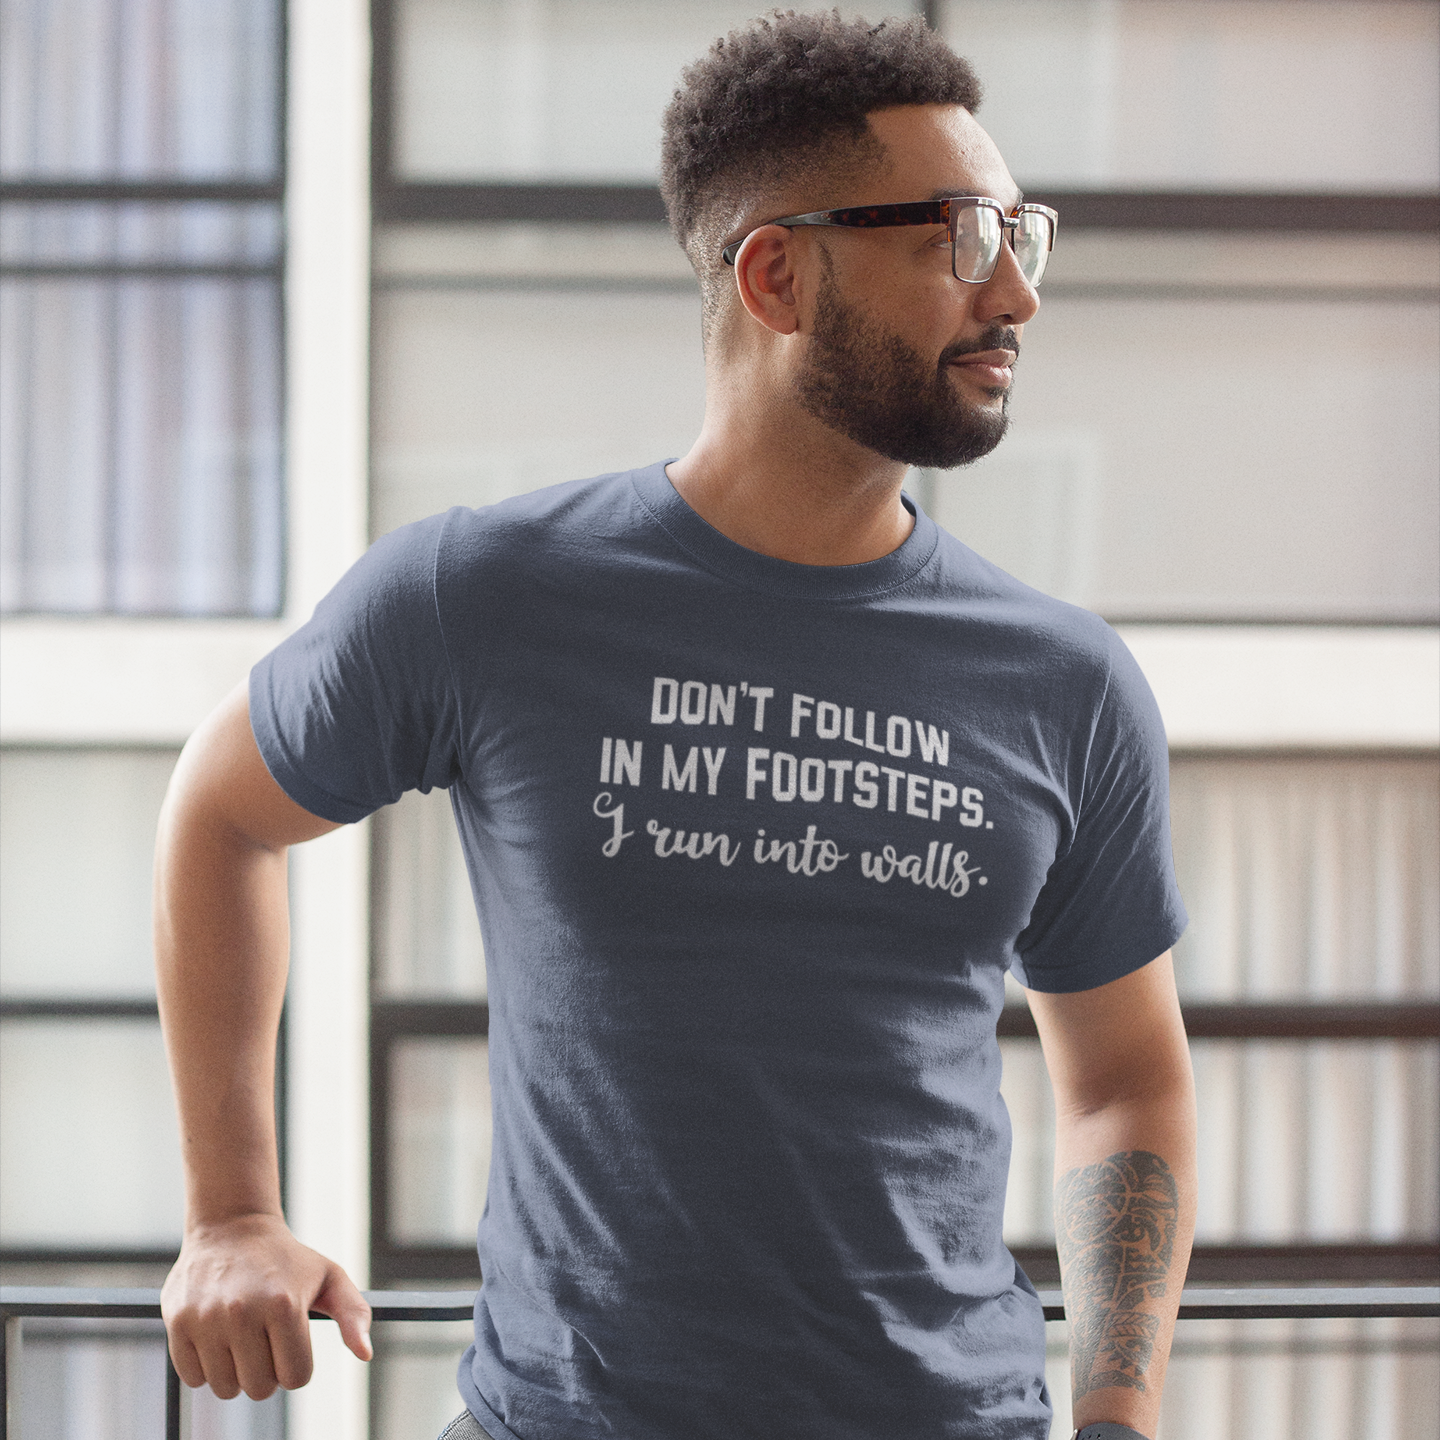 'Don't follow in my footsteps. I run into walls.' volwassene shirt